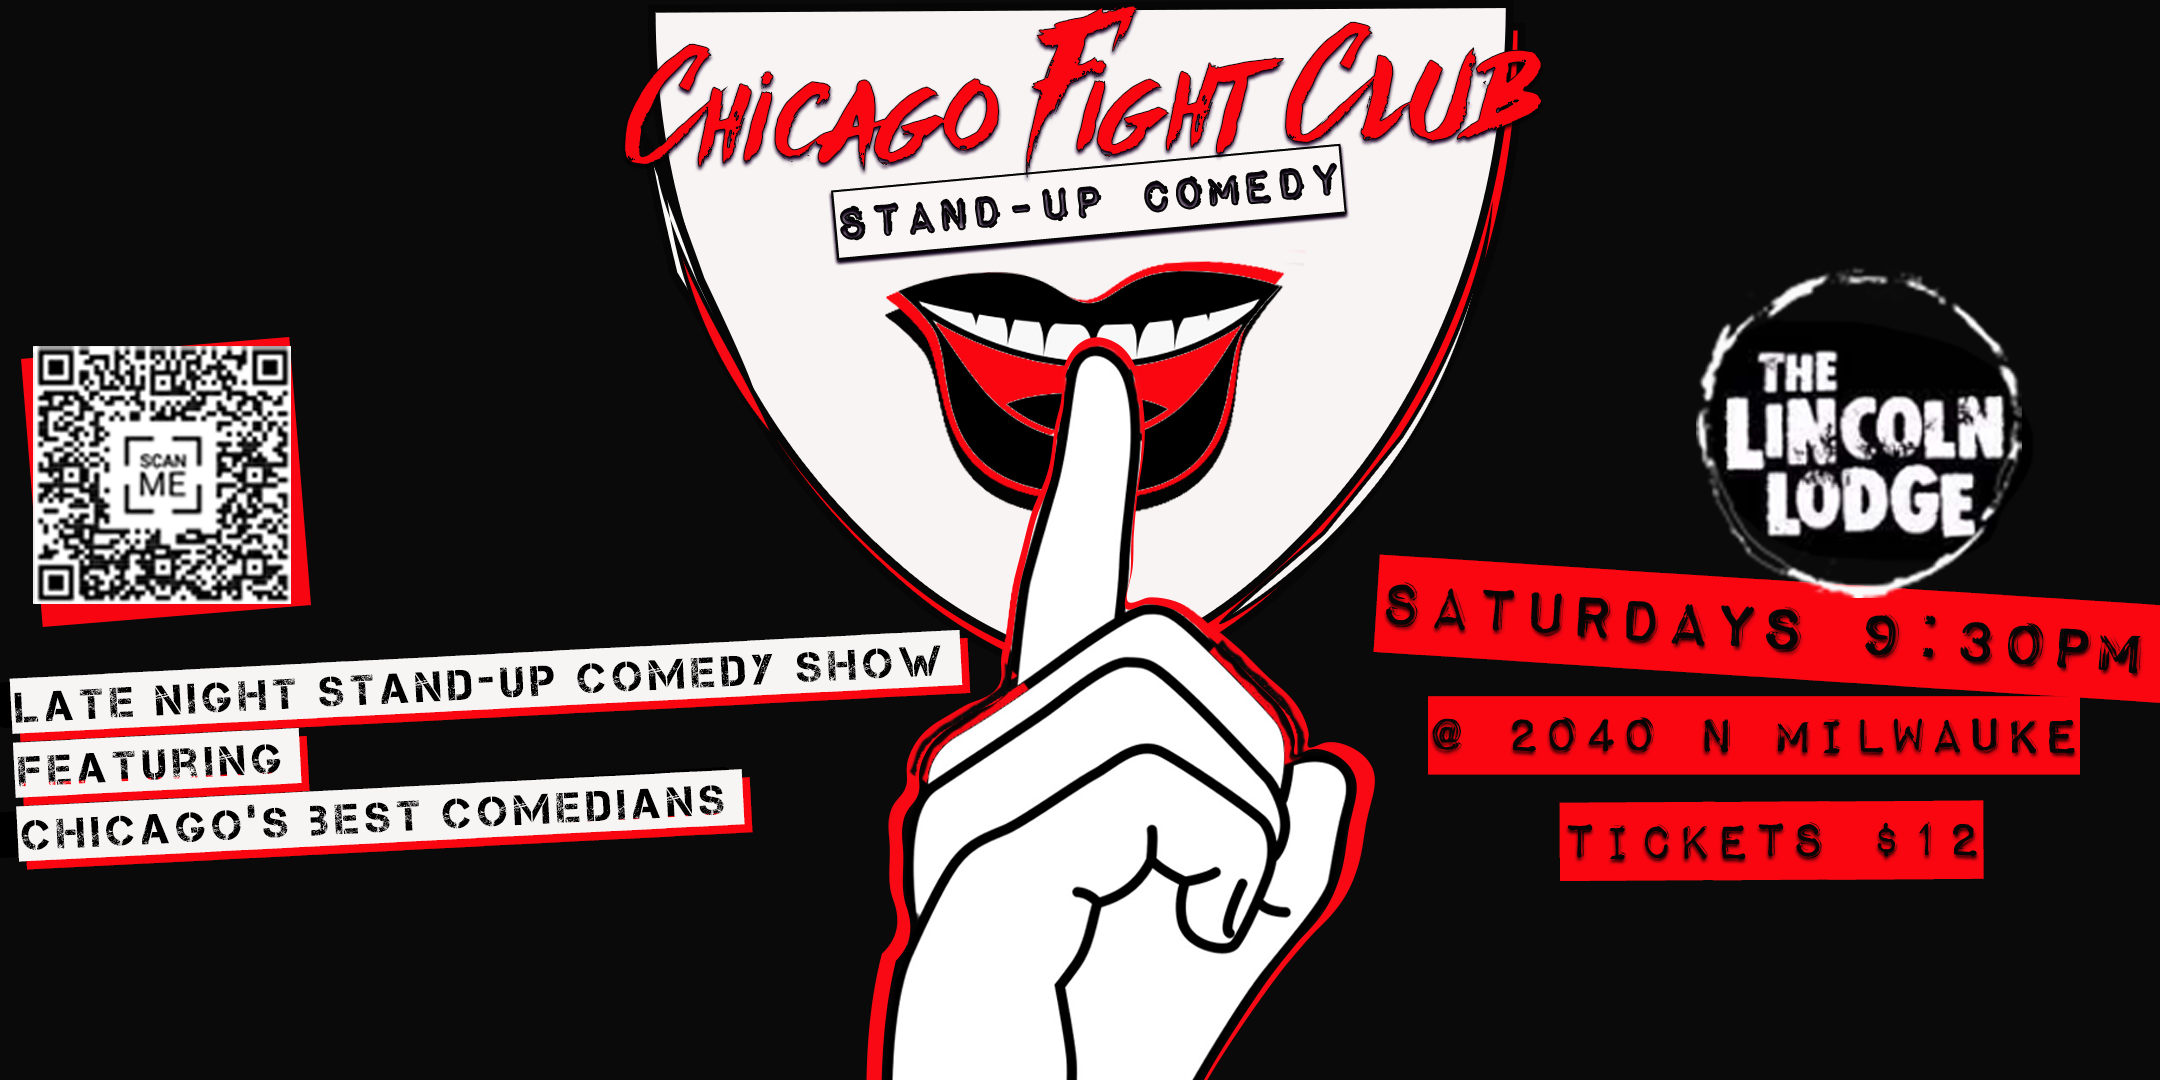 Chicago Fight Club Presents: Live Stand-Up Comedy